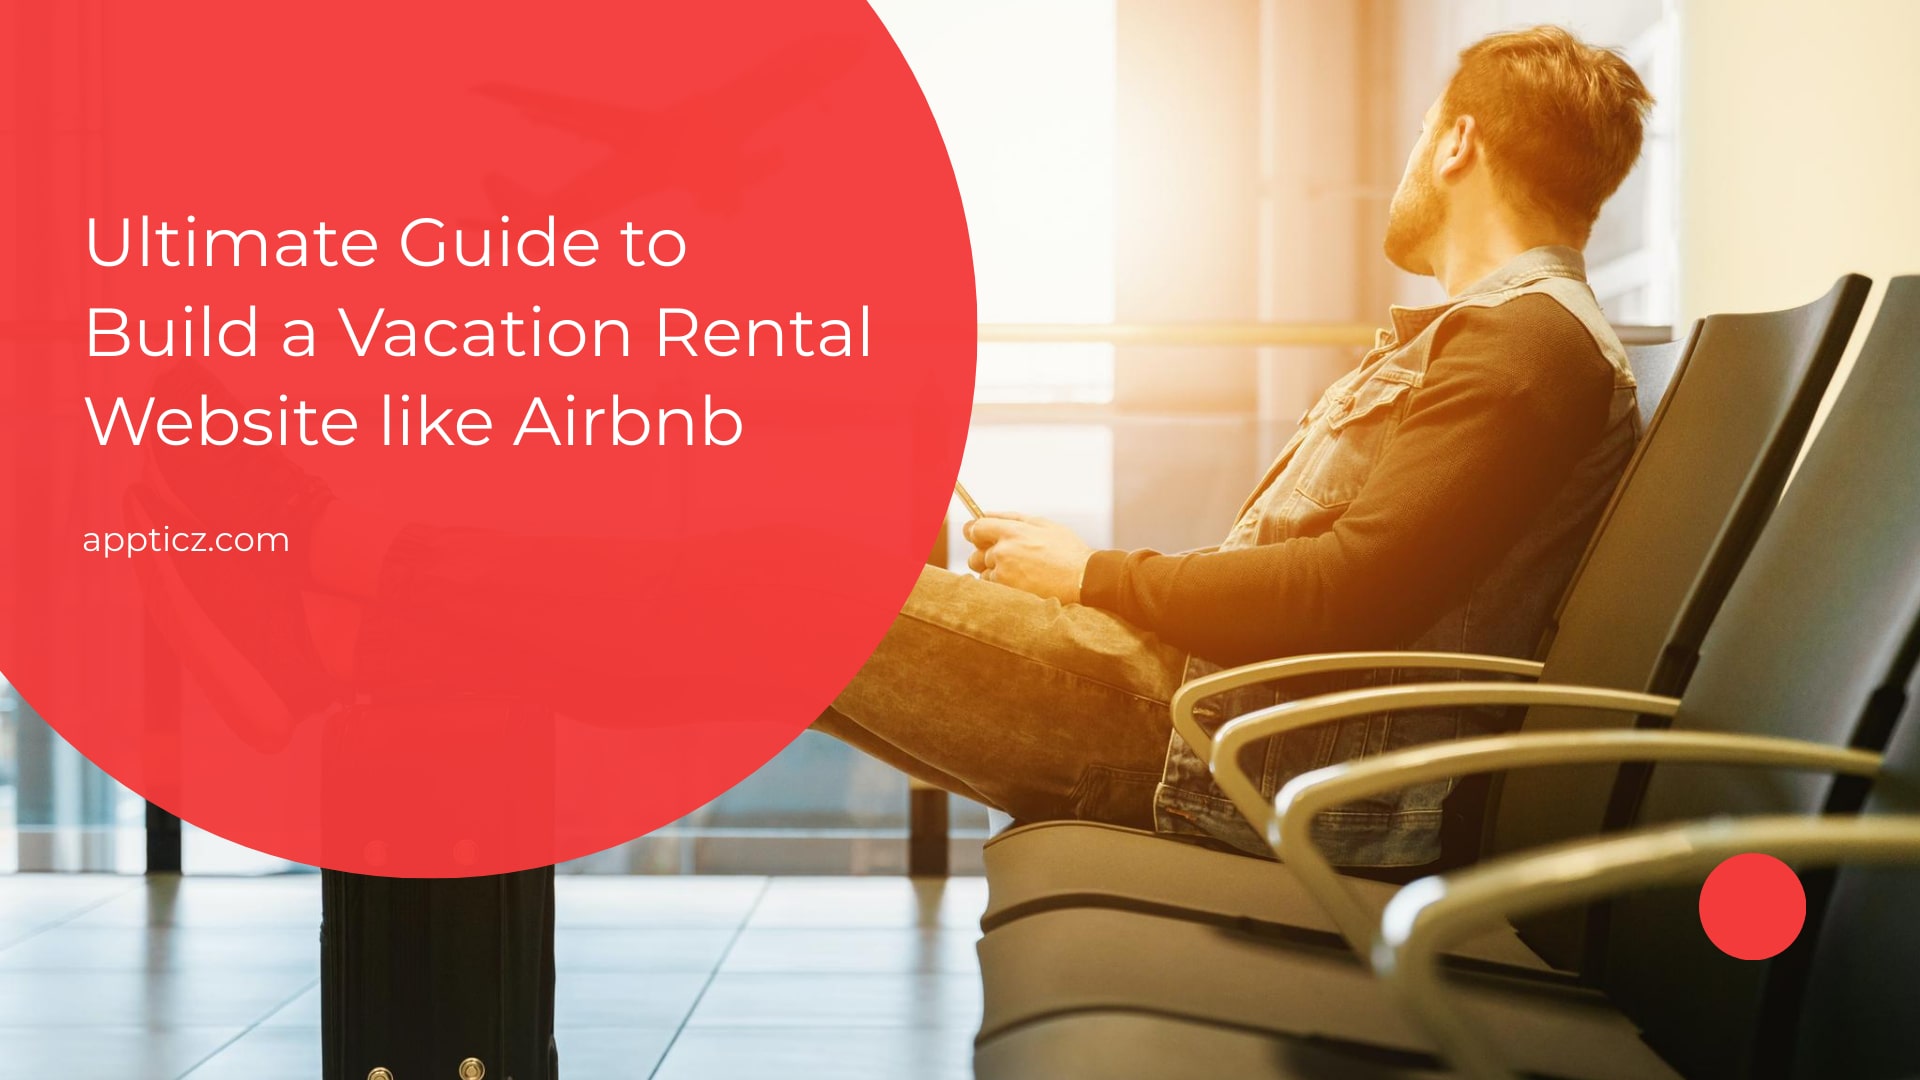 How to Build a Vacation Rental Website like Airbnb? | Cost to Develop an App Like Airbnb.